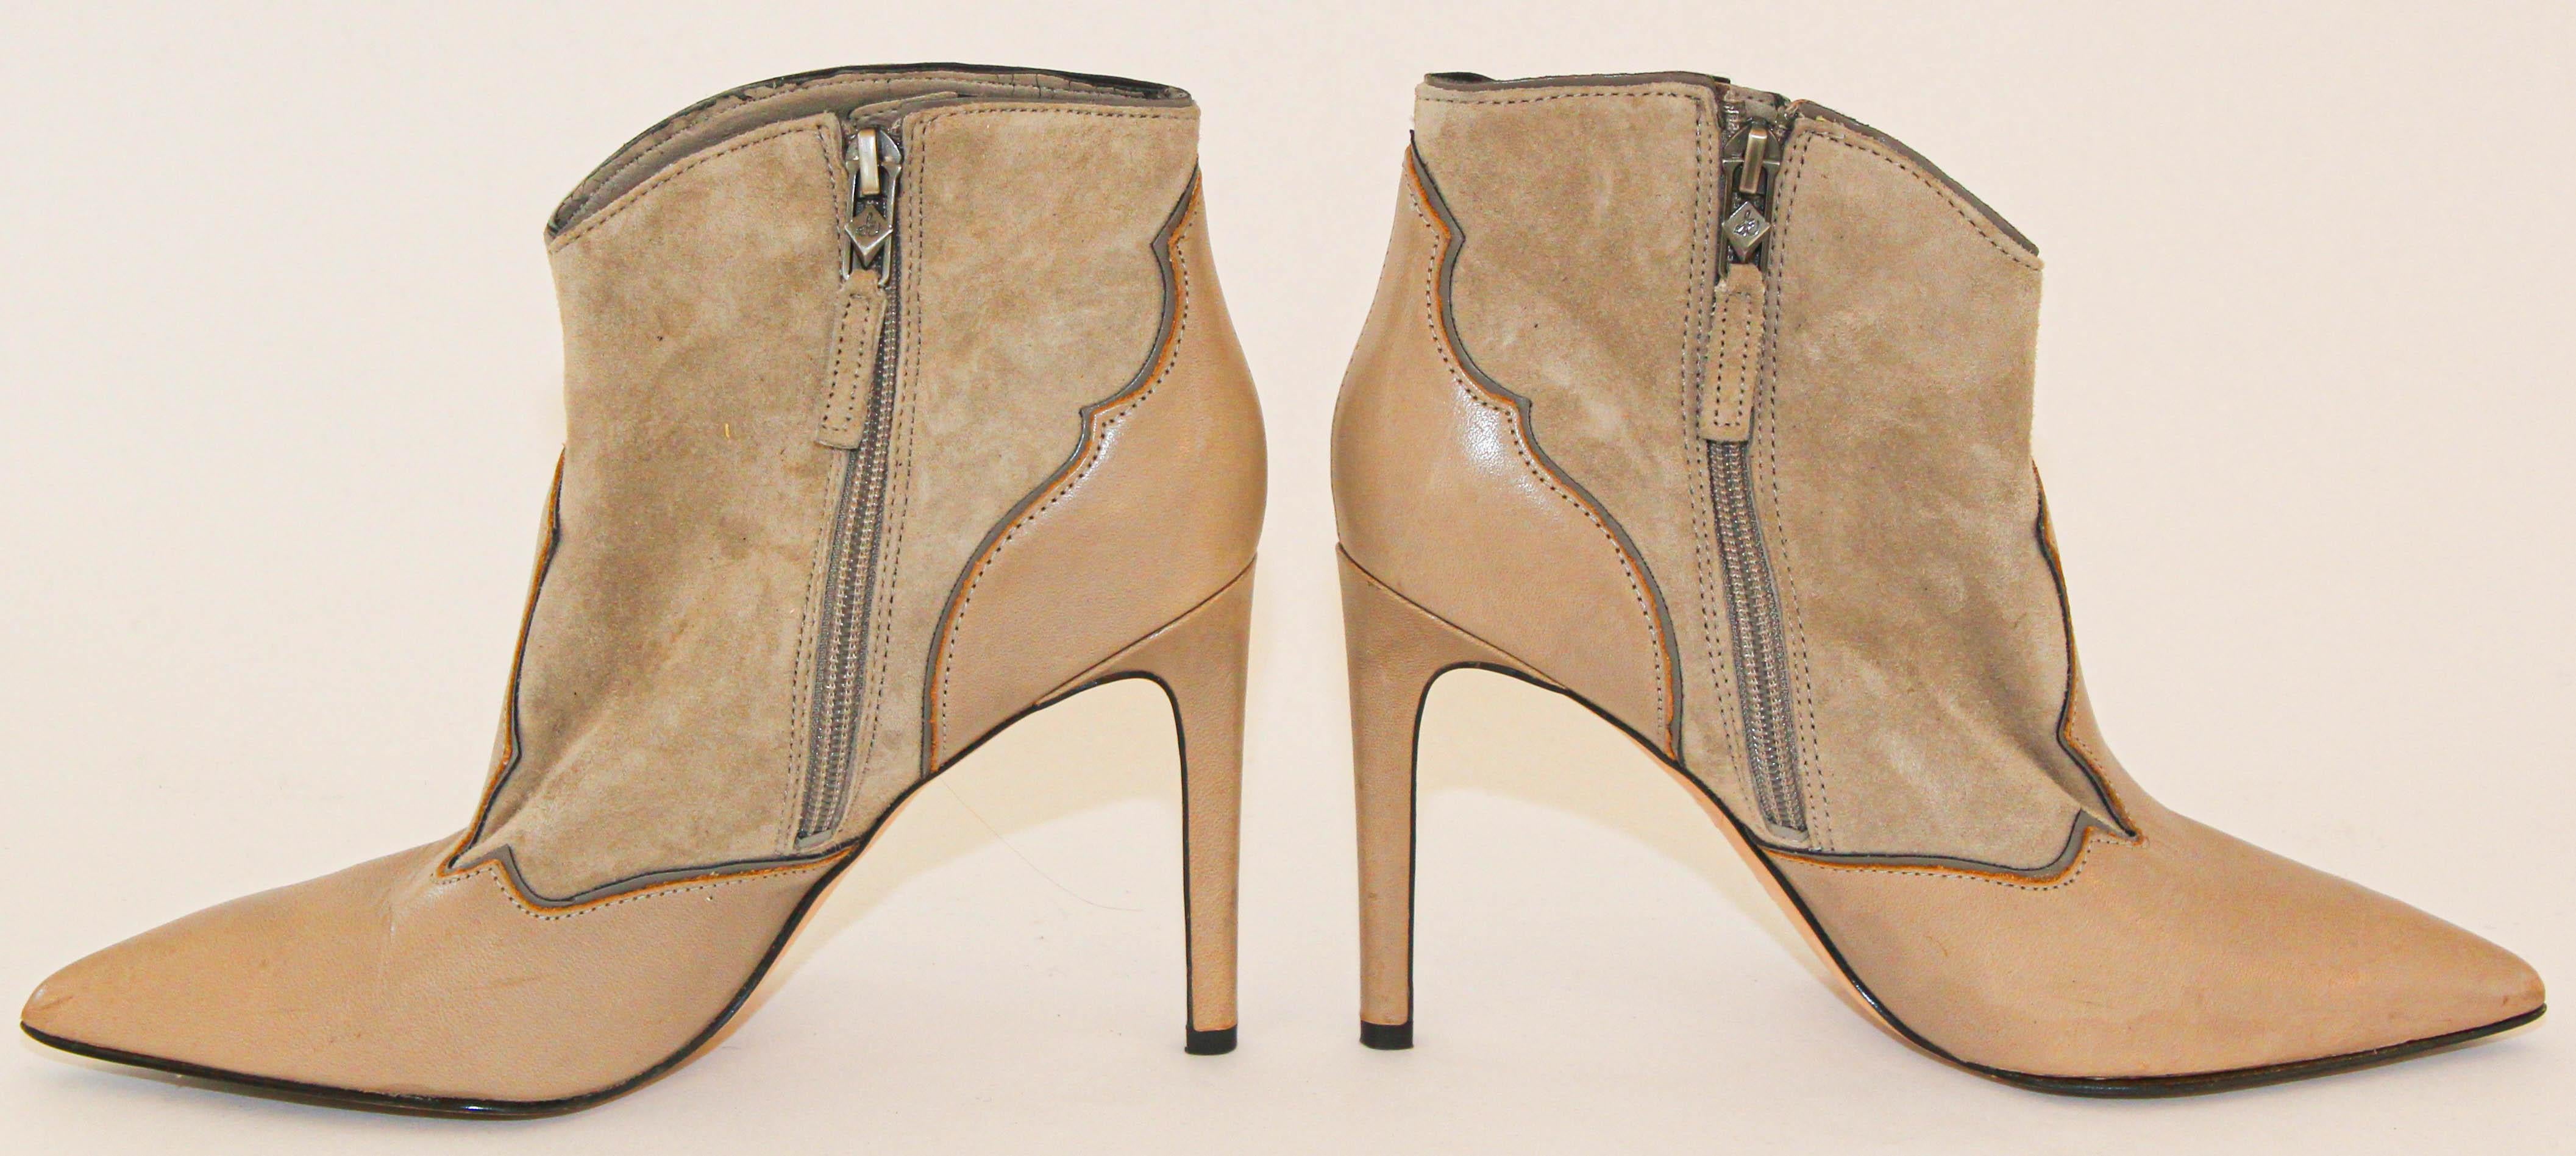 Sam Edelman High Heels Tan Leather Women Ankle Booties Stiletto Size 7 For Sale 7